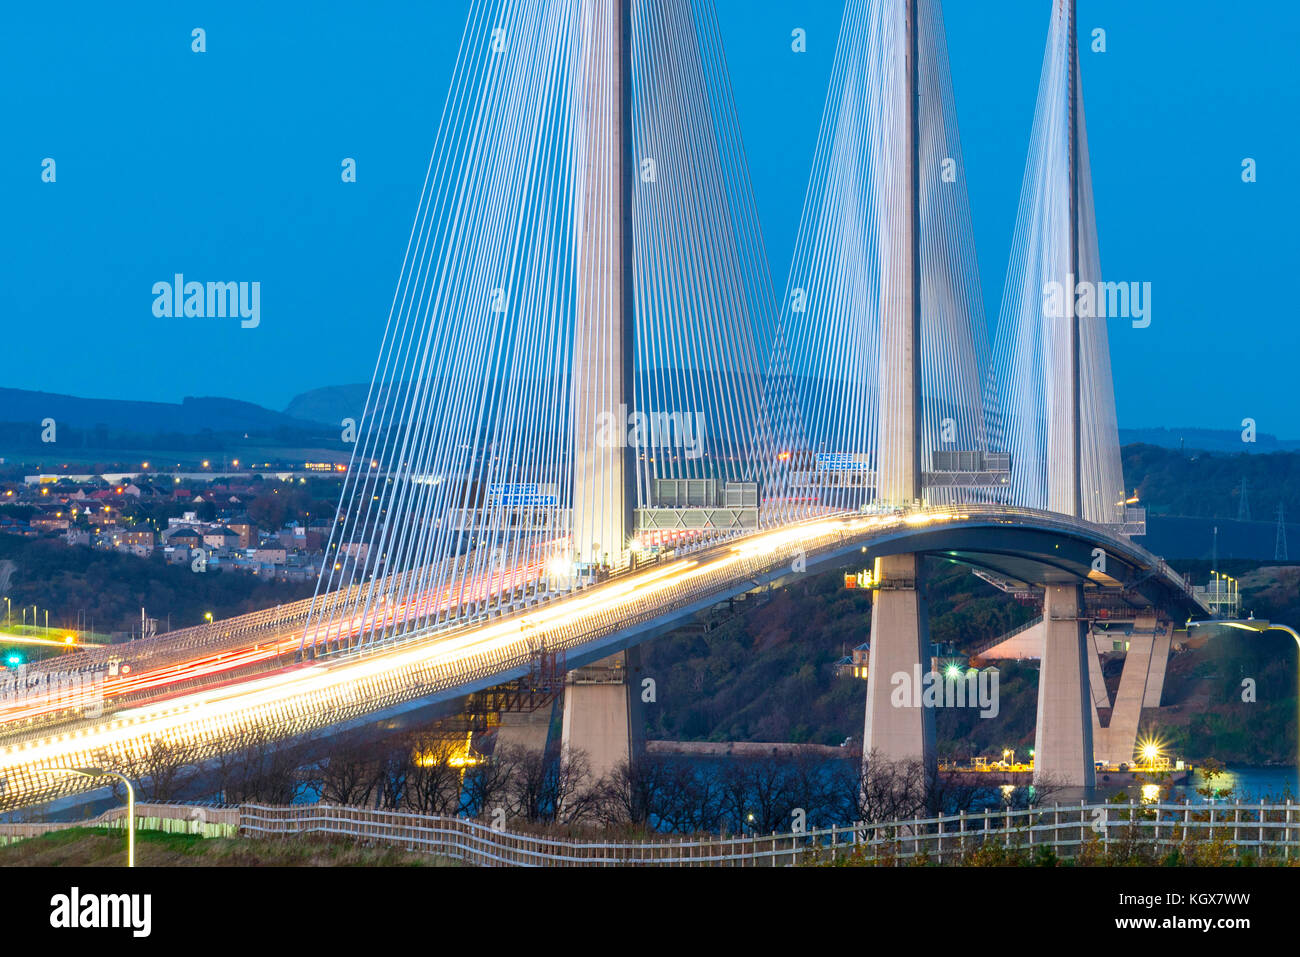 Night view of new Queensferry Crossing Bridge spanning the Firth of Forth in Scotland, United Kingdom Stock Photo